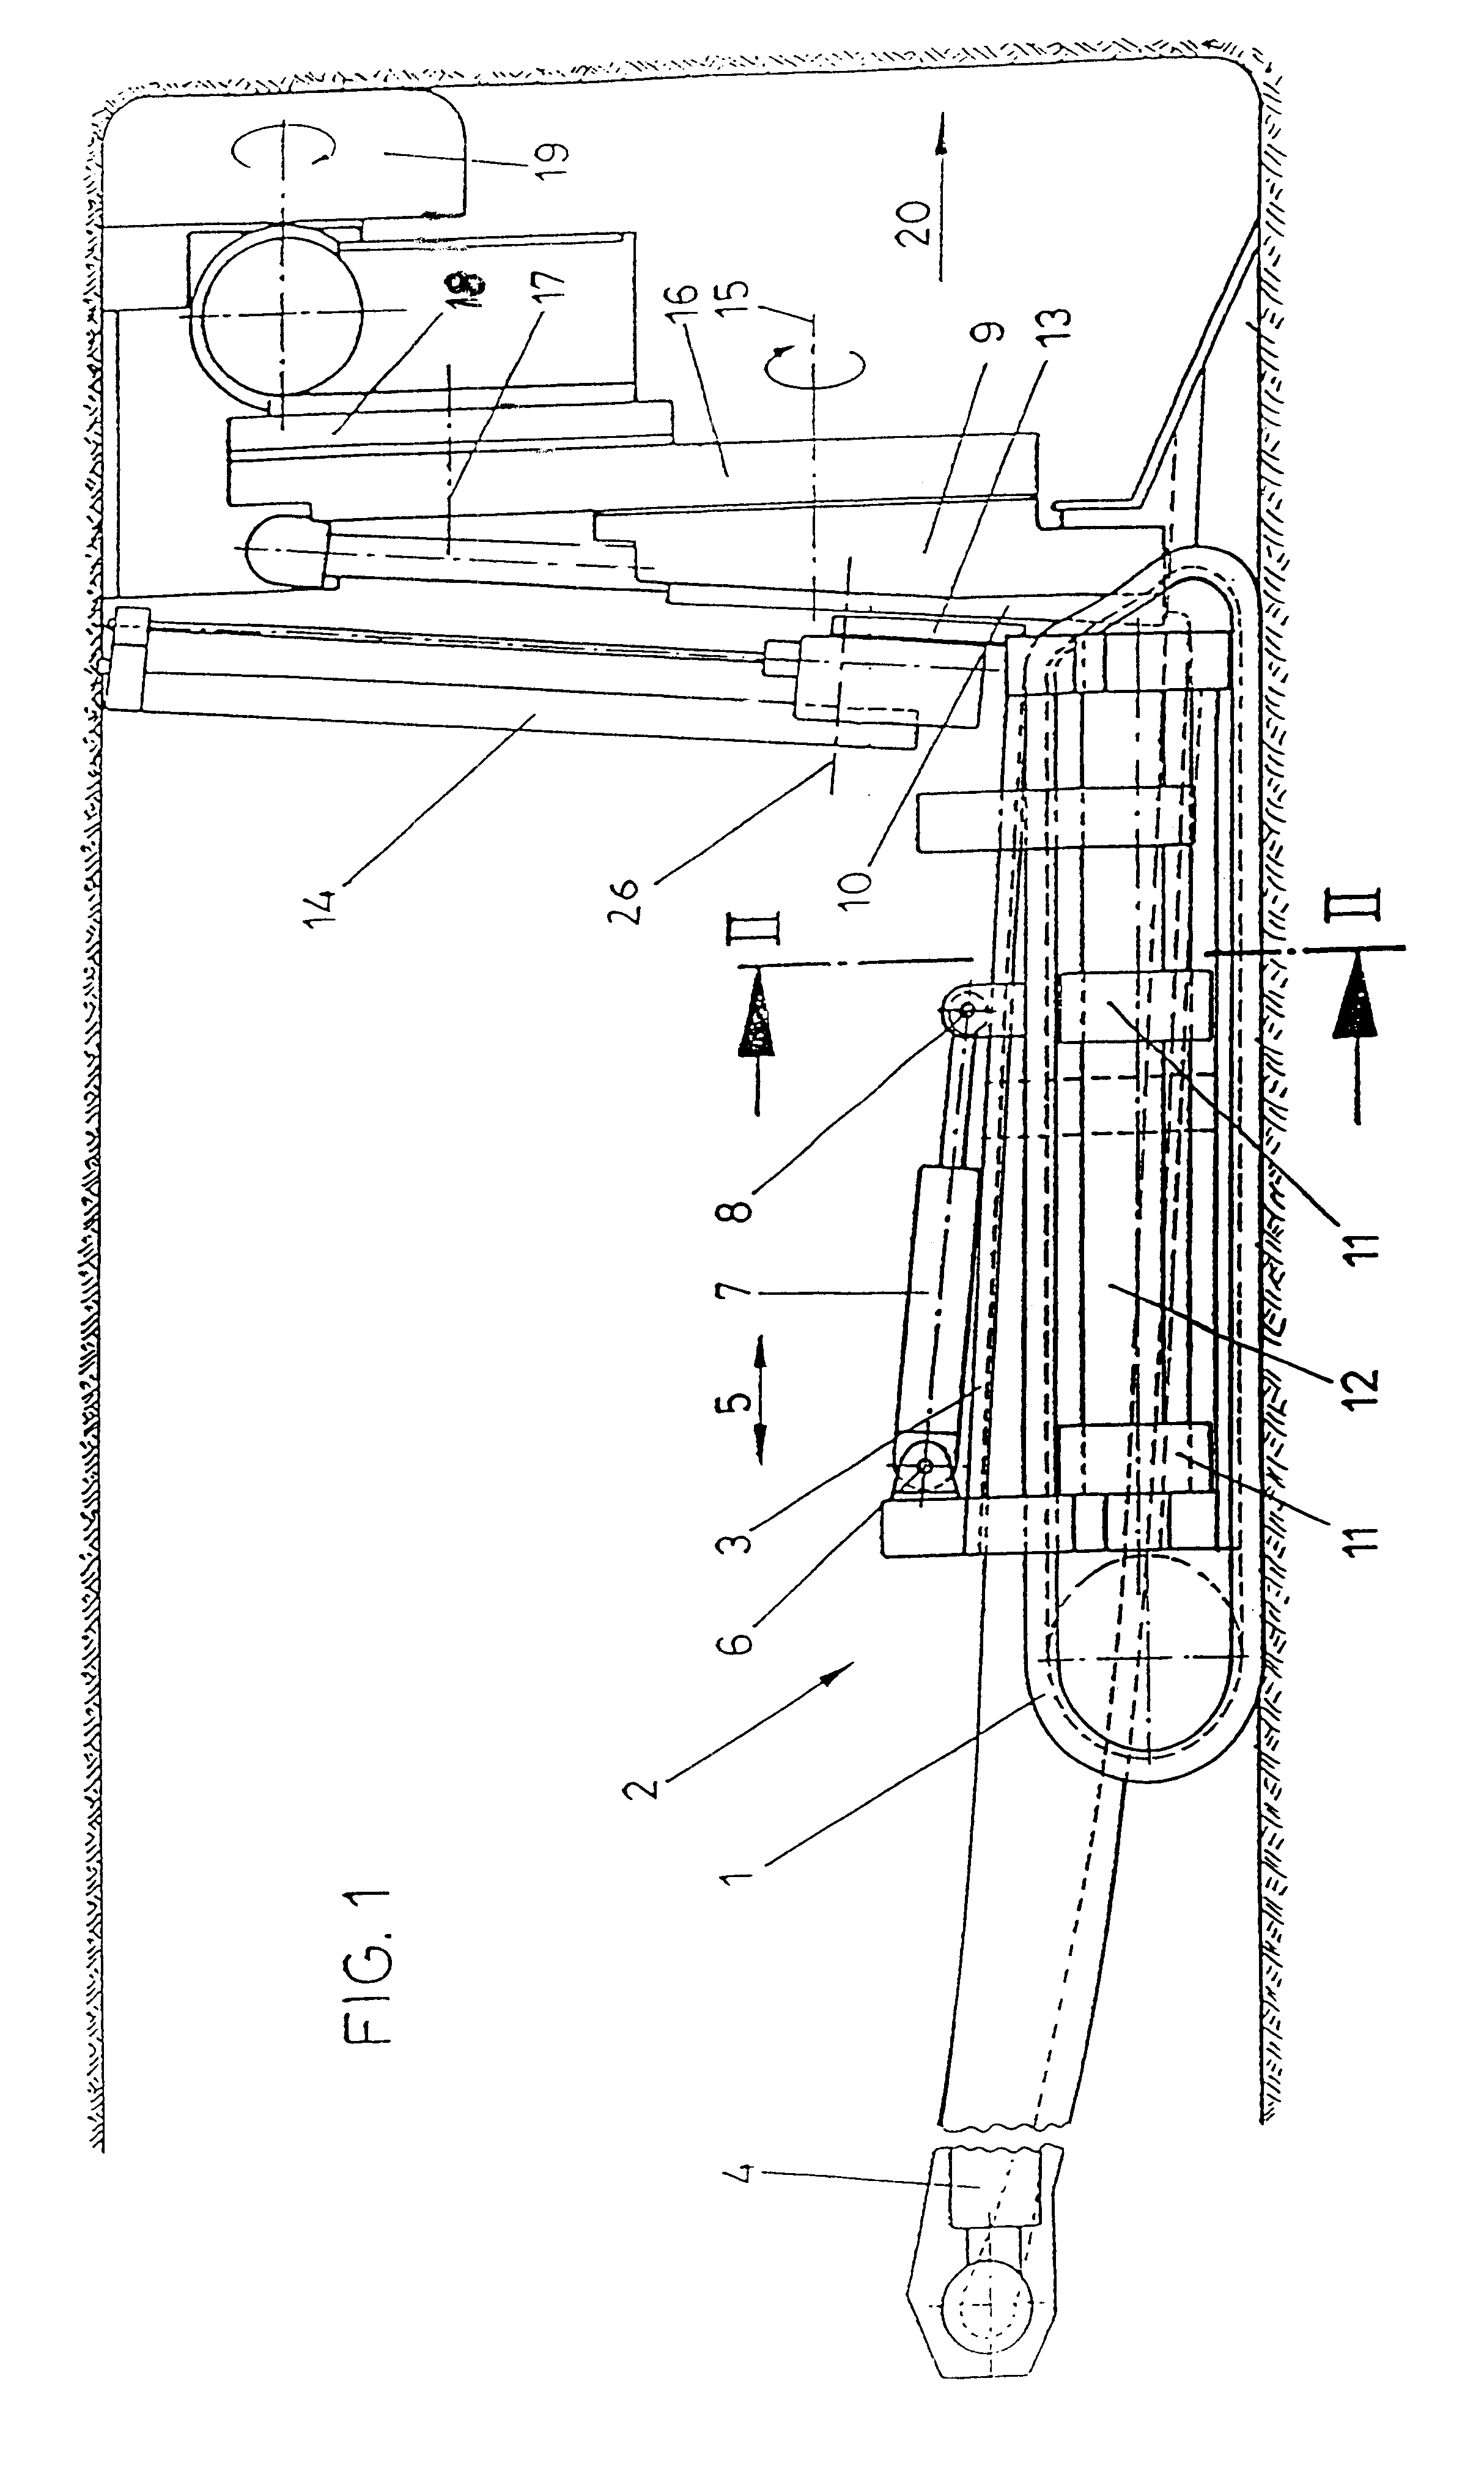 Mining machine with sliding cutting tool assembly